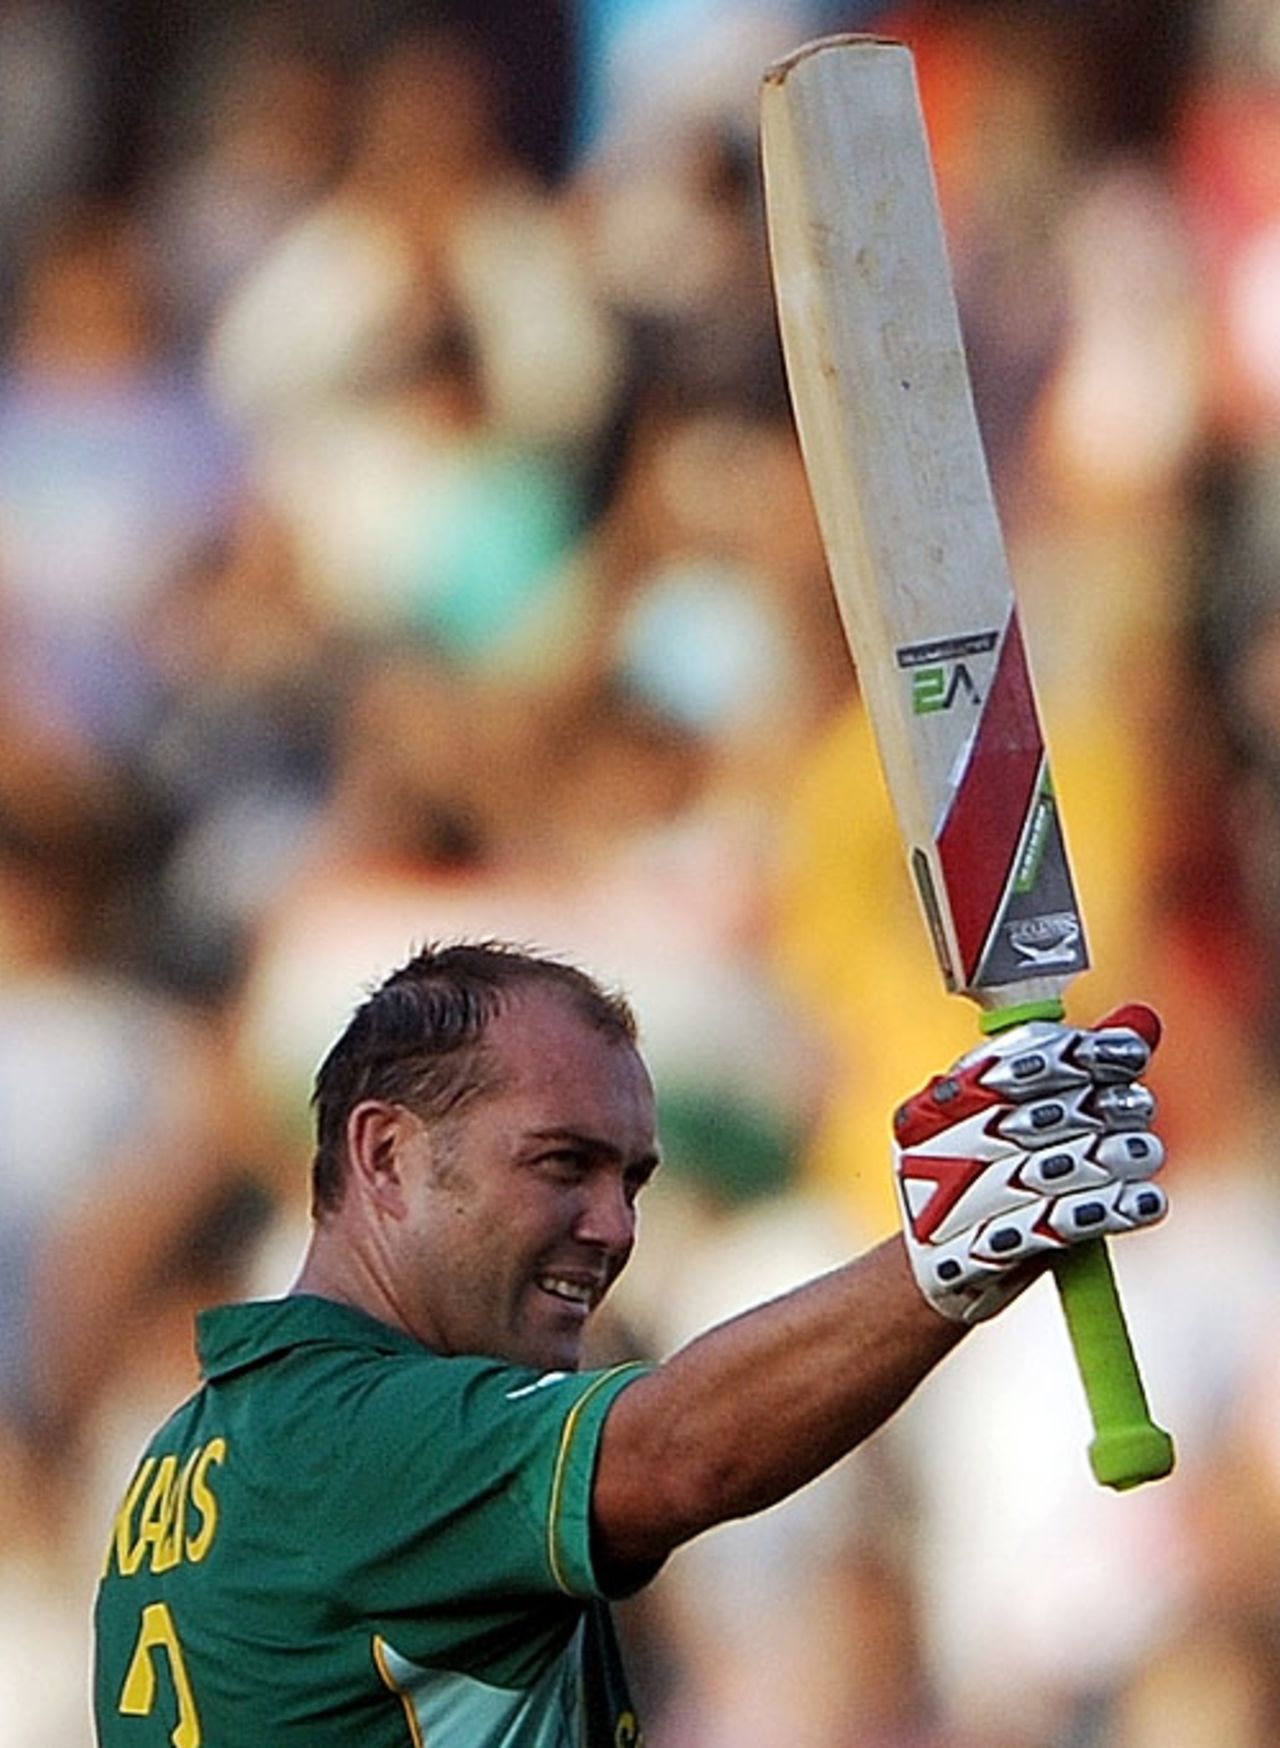 Jacques Kallis raced to a century off 92 balls, India v South Africa, 3rd ODI, Ahmedabad, February 27, 2010